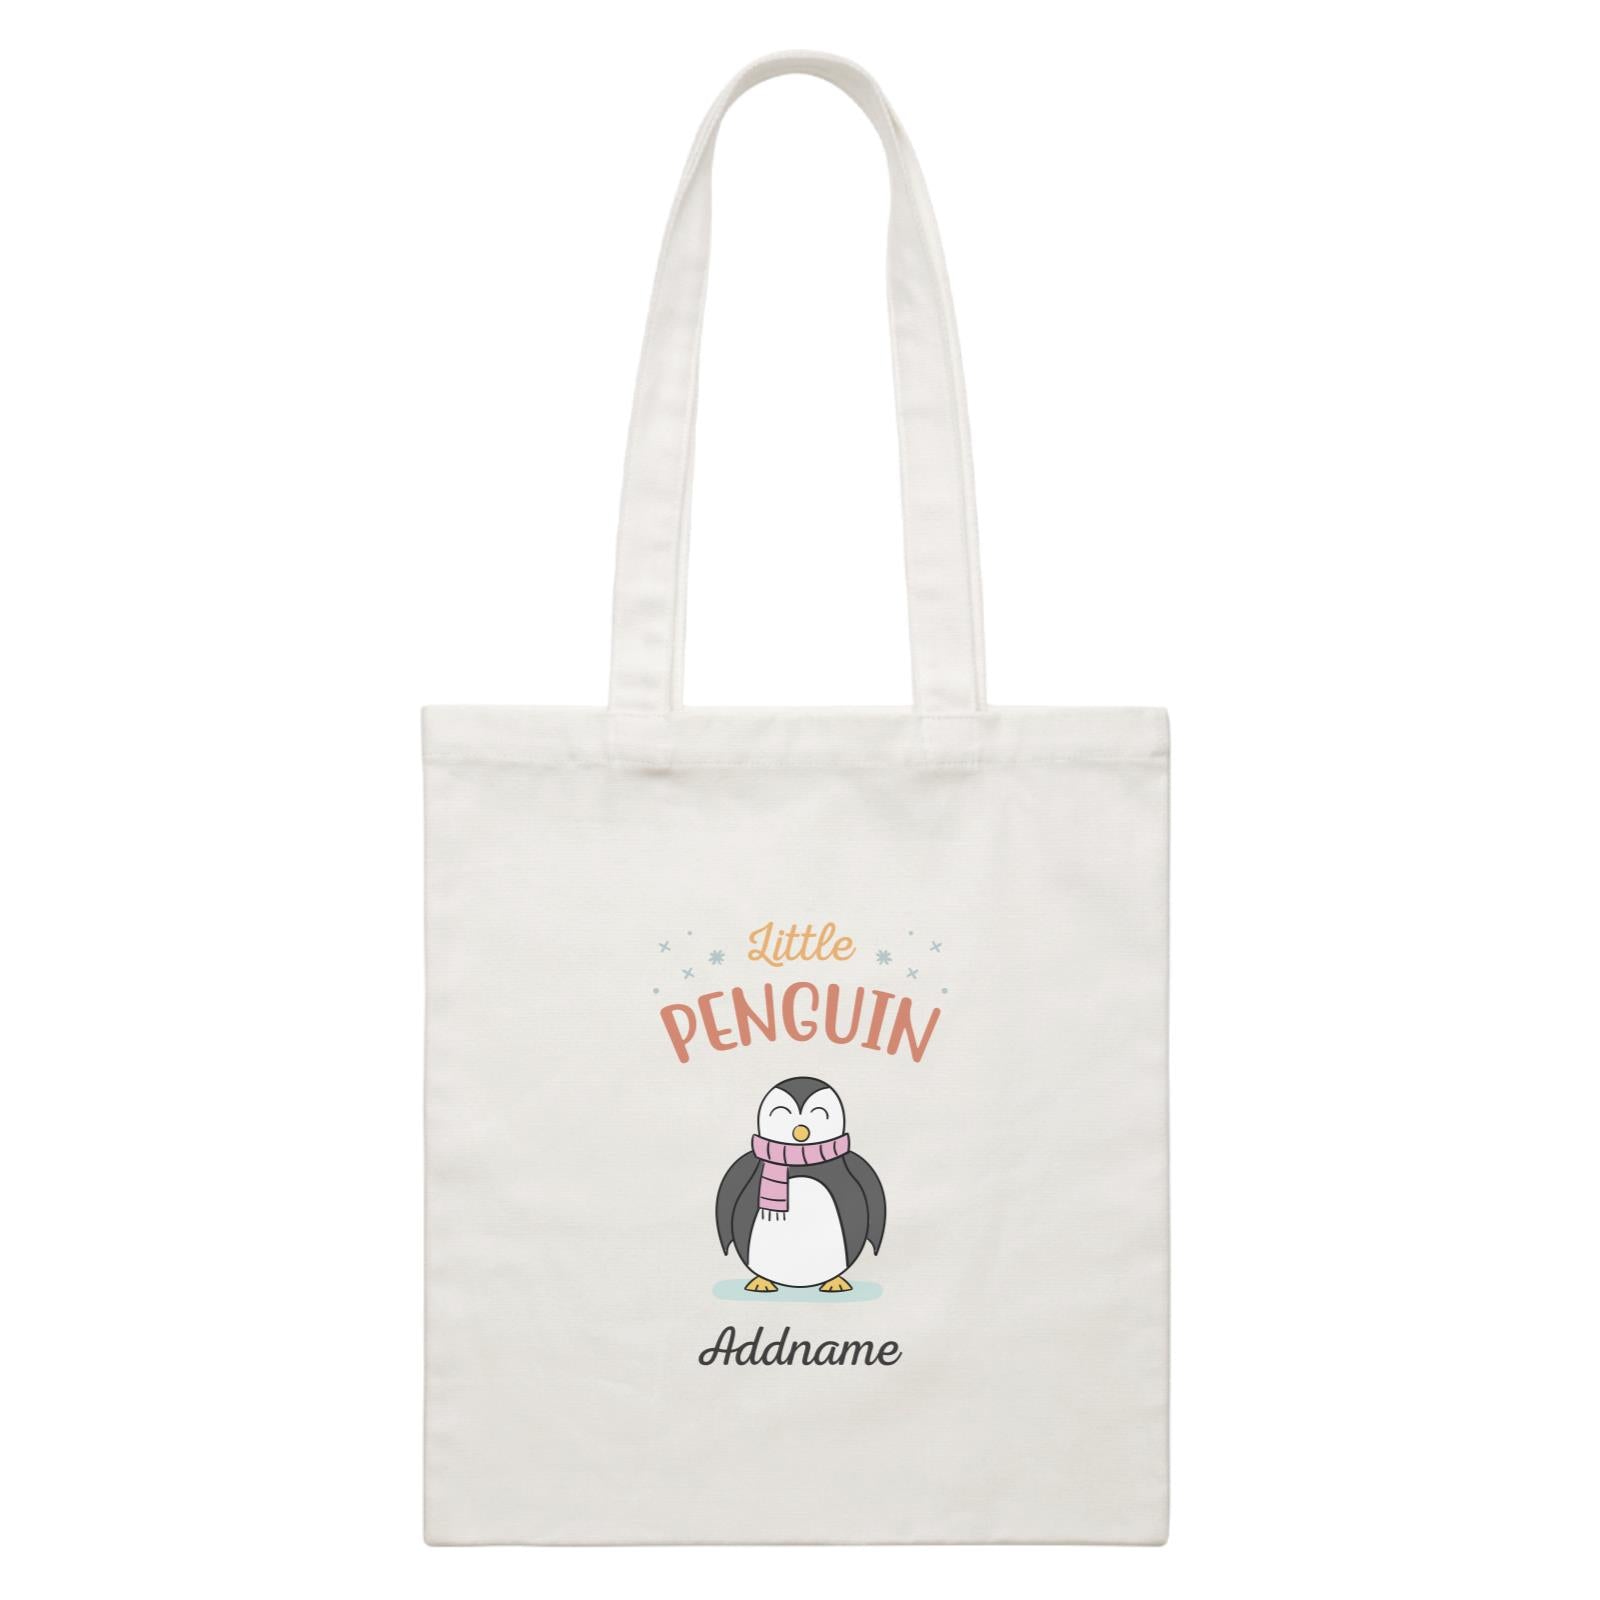 Penguin Family Little Penguin With Scarf Addname Canvas Bag